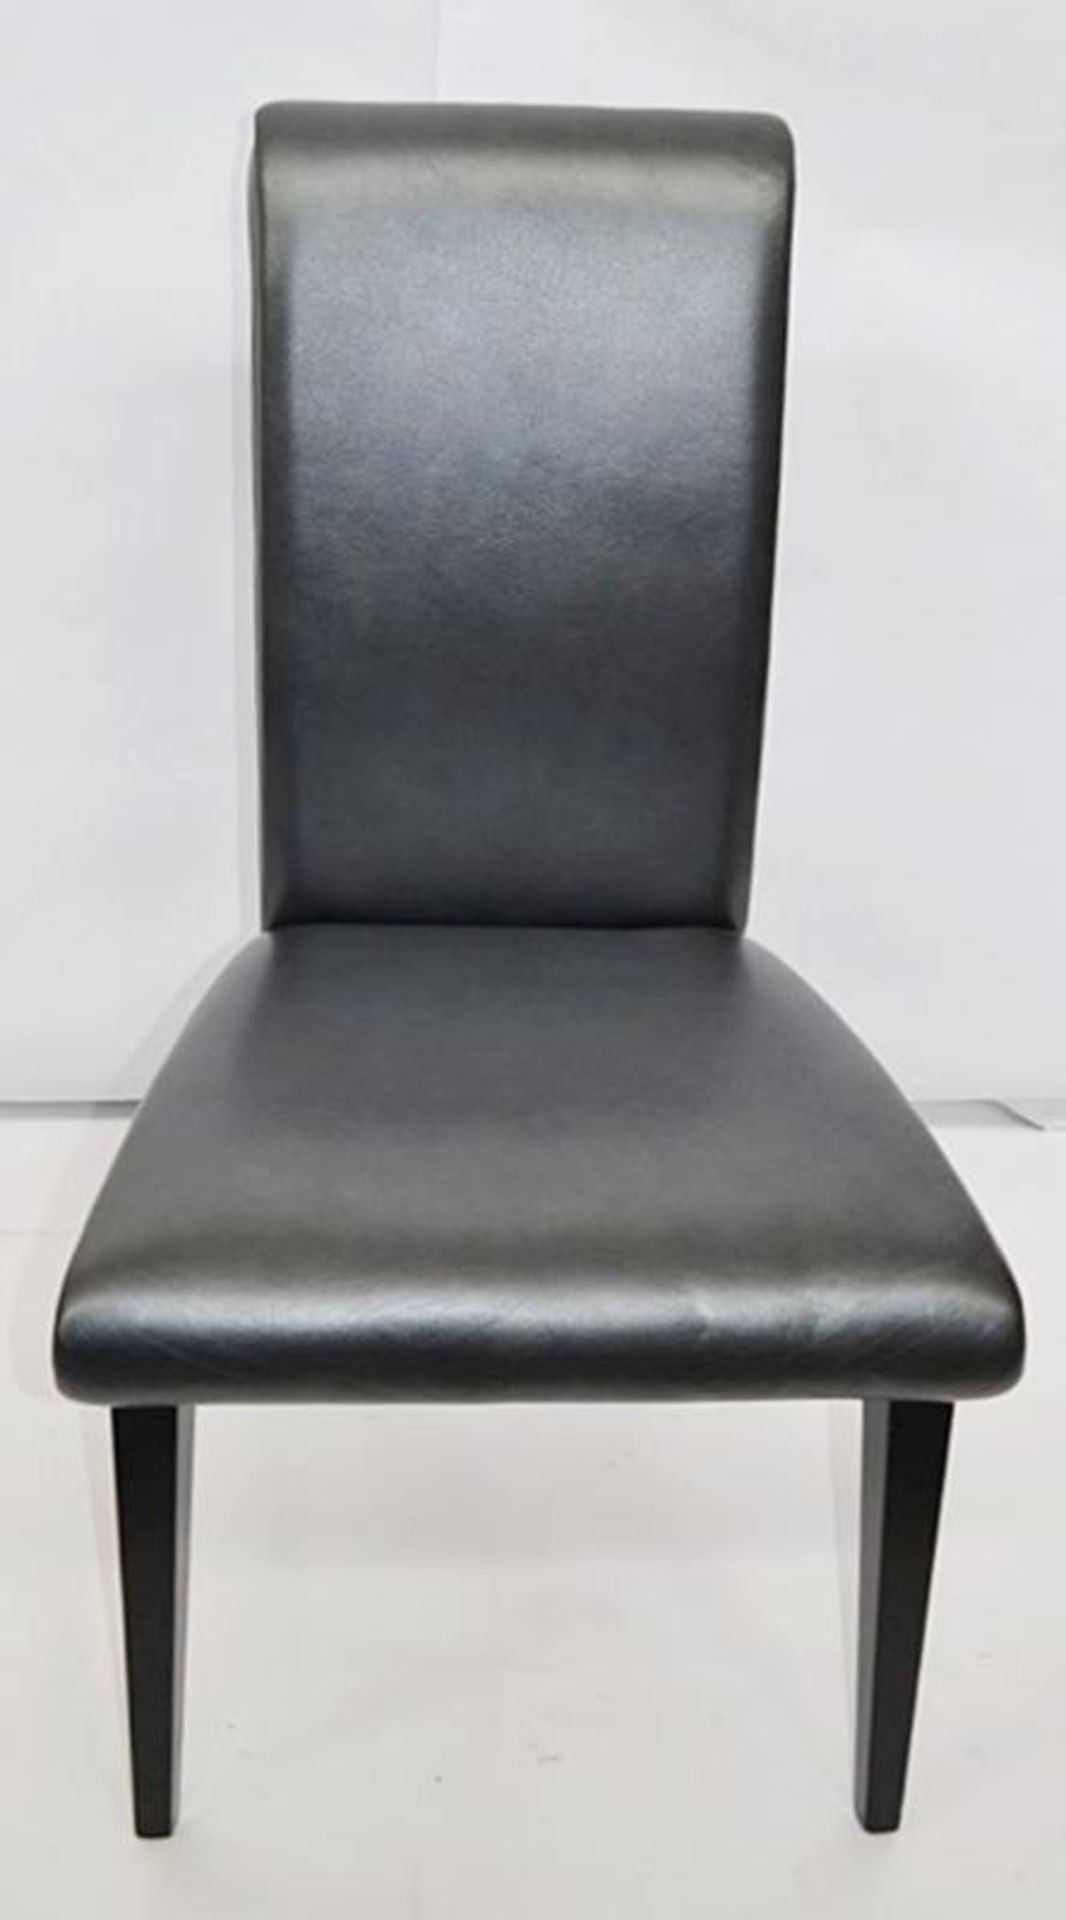 1 x CATTALAN “Lulu” High Back Chair – Upholstered In A Rich Metallic Charcoal - Dimensions: W50 x H9 - Image 8 of 8